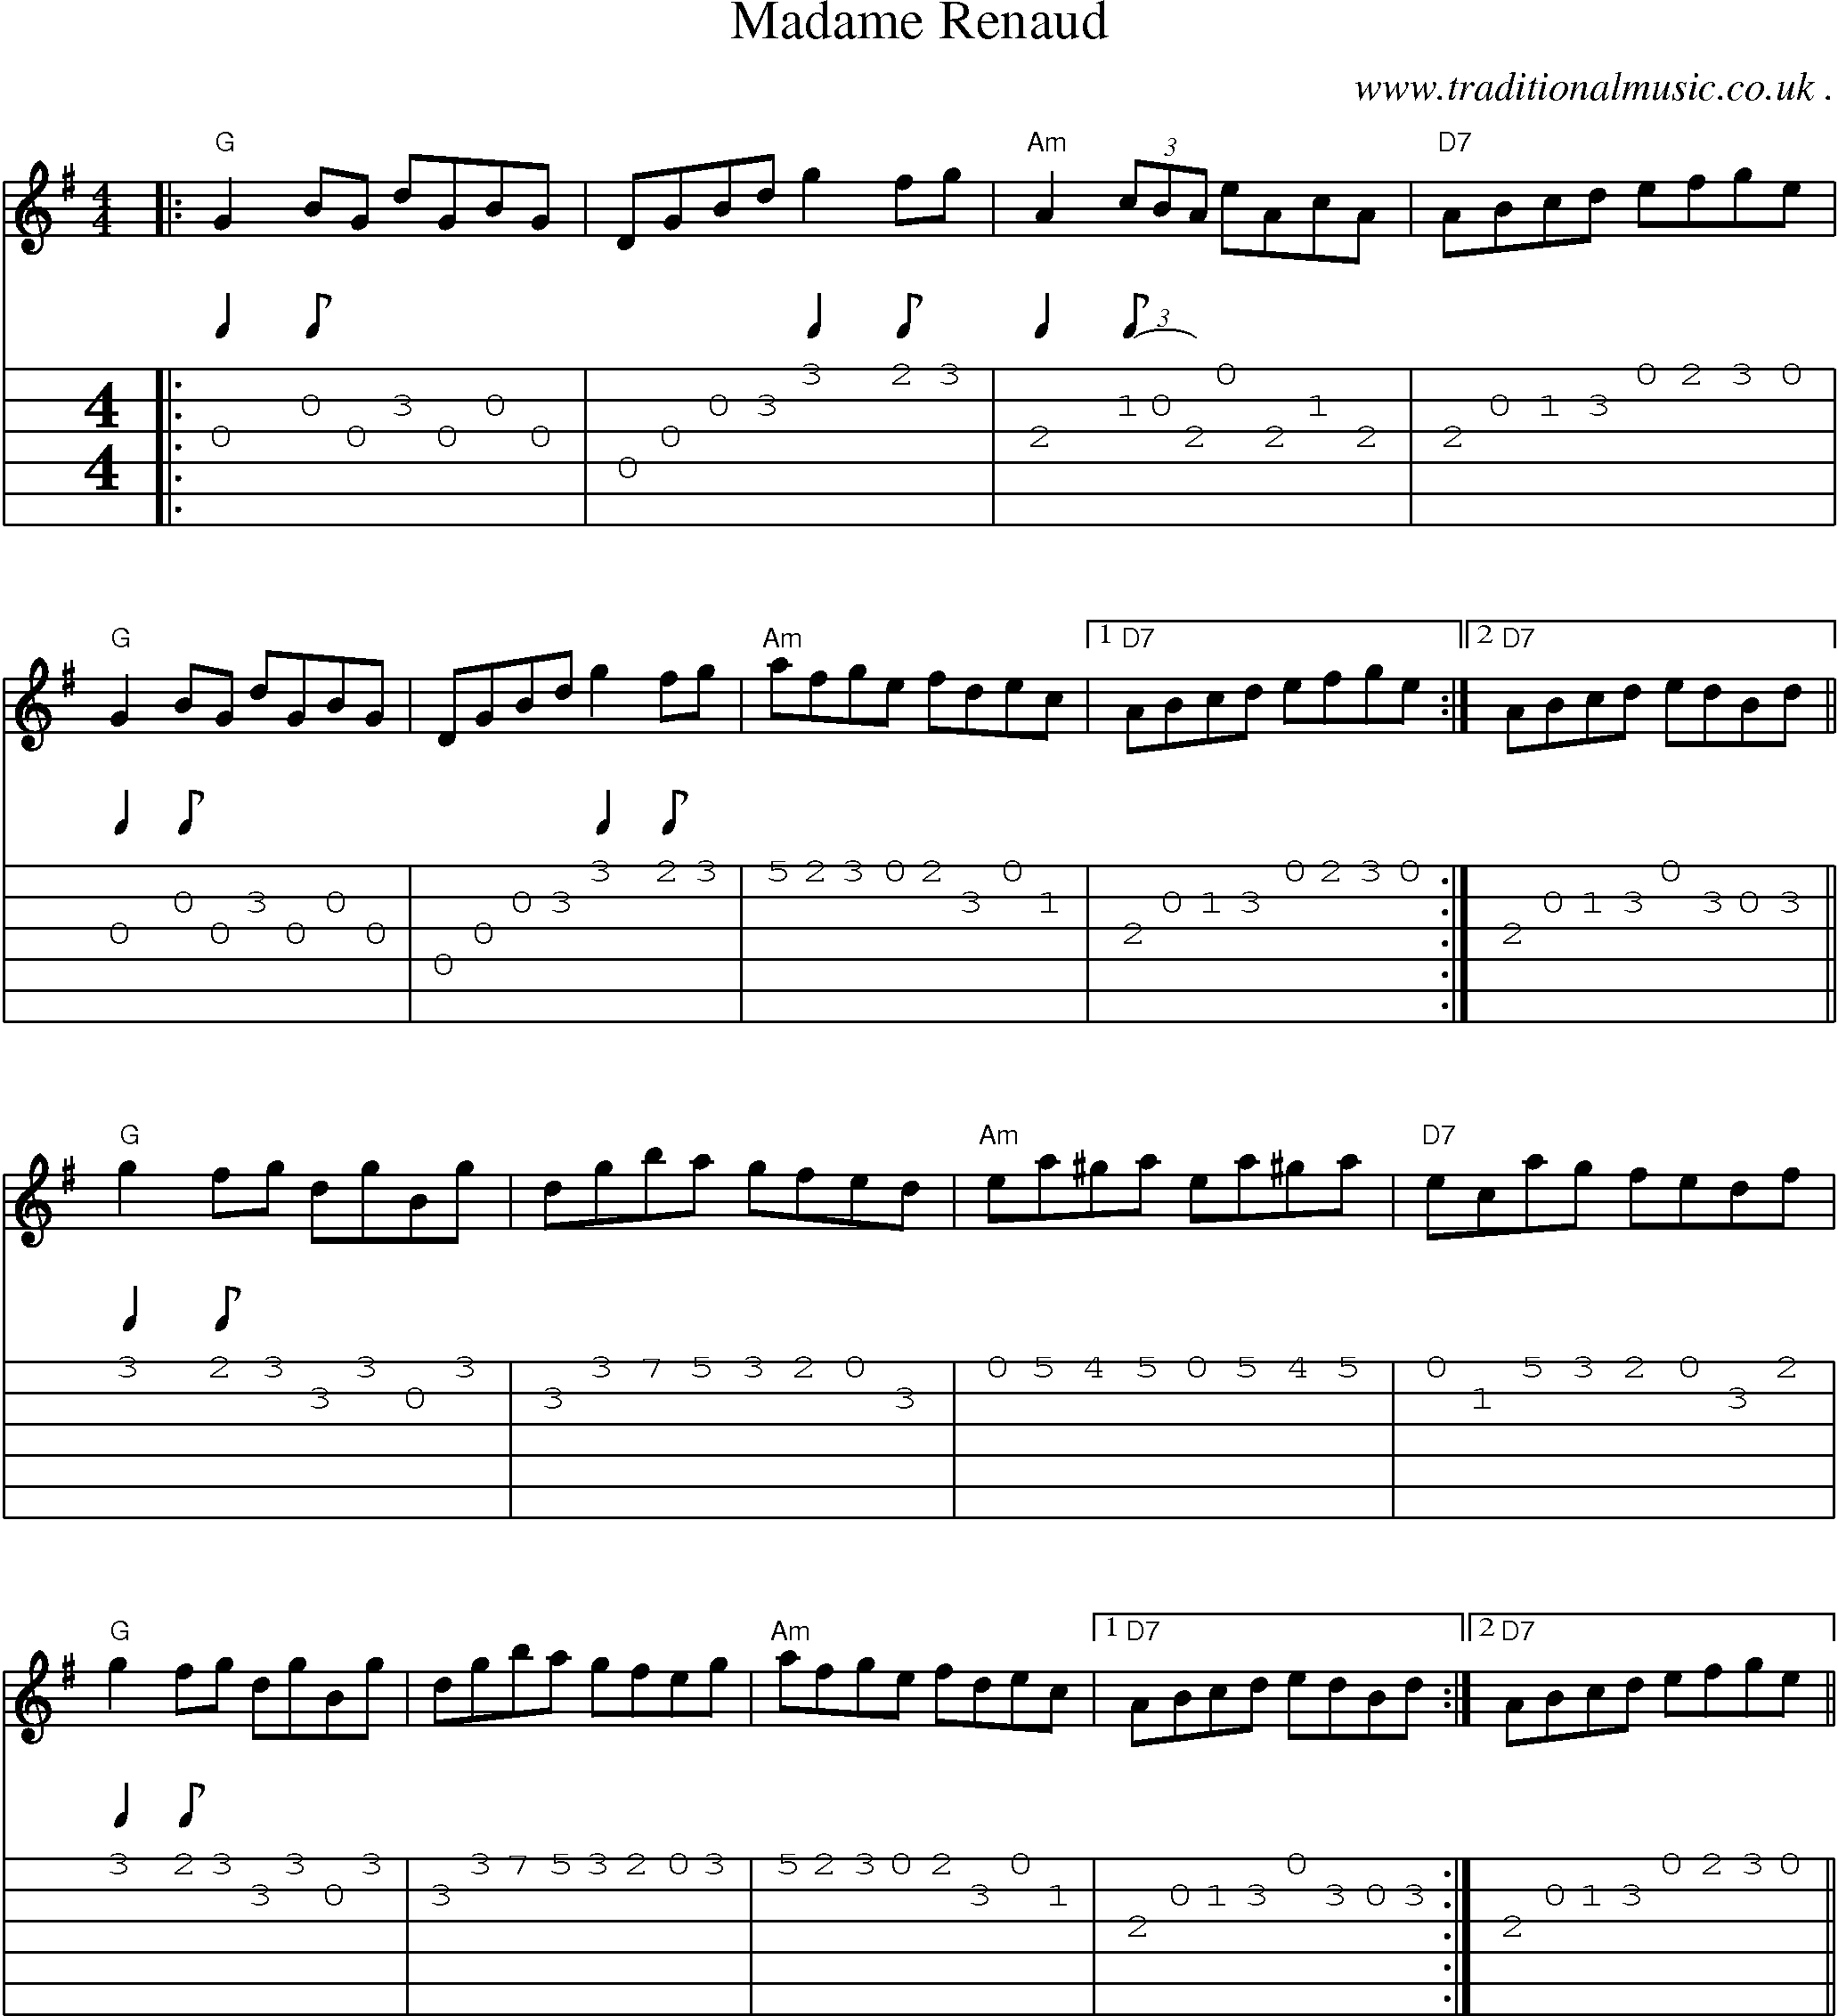 Music Score and Guitar Tabs for Madame Renaud